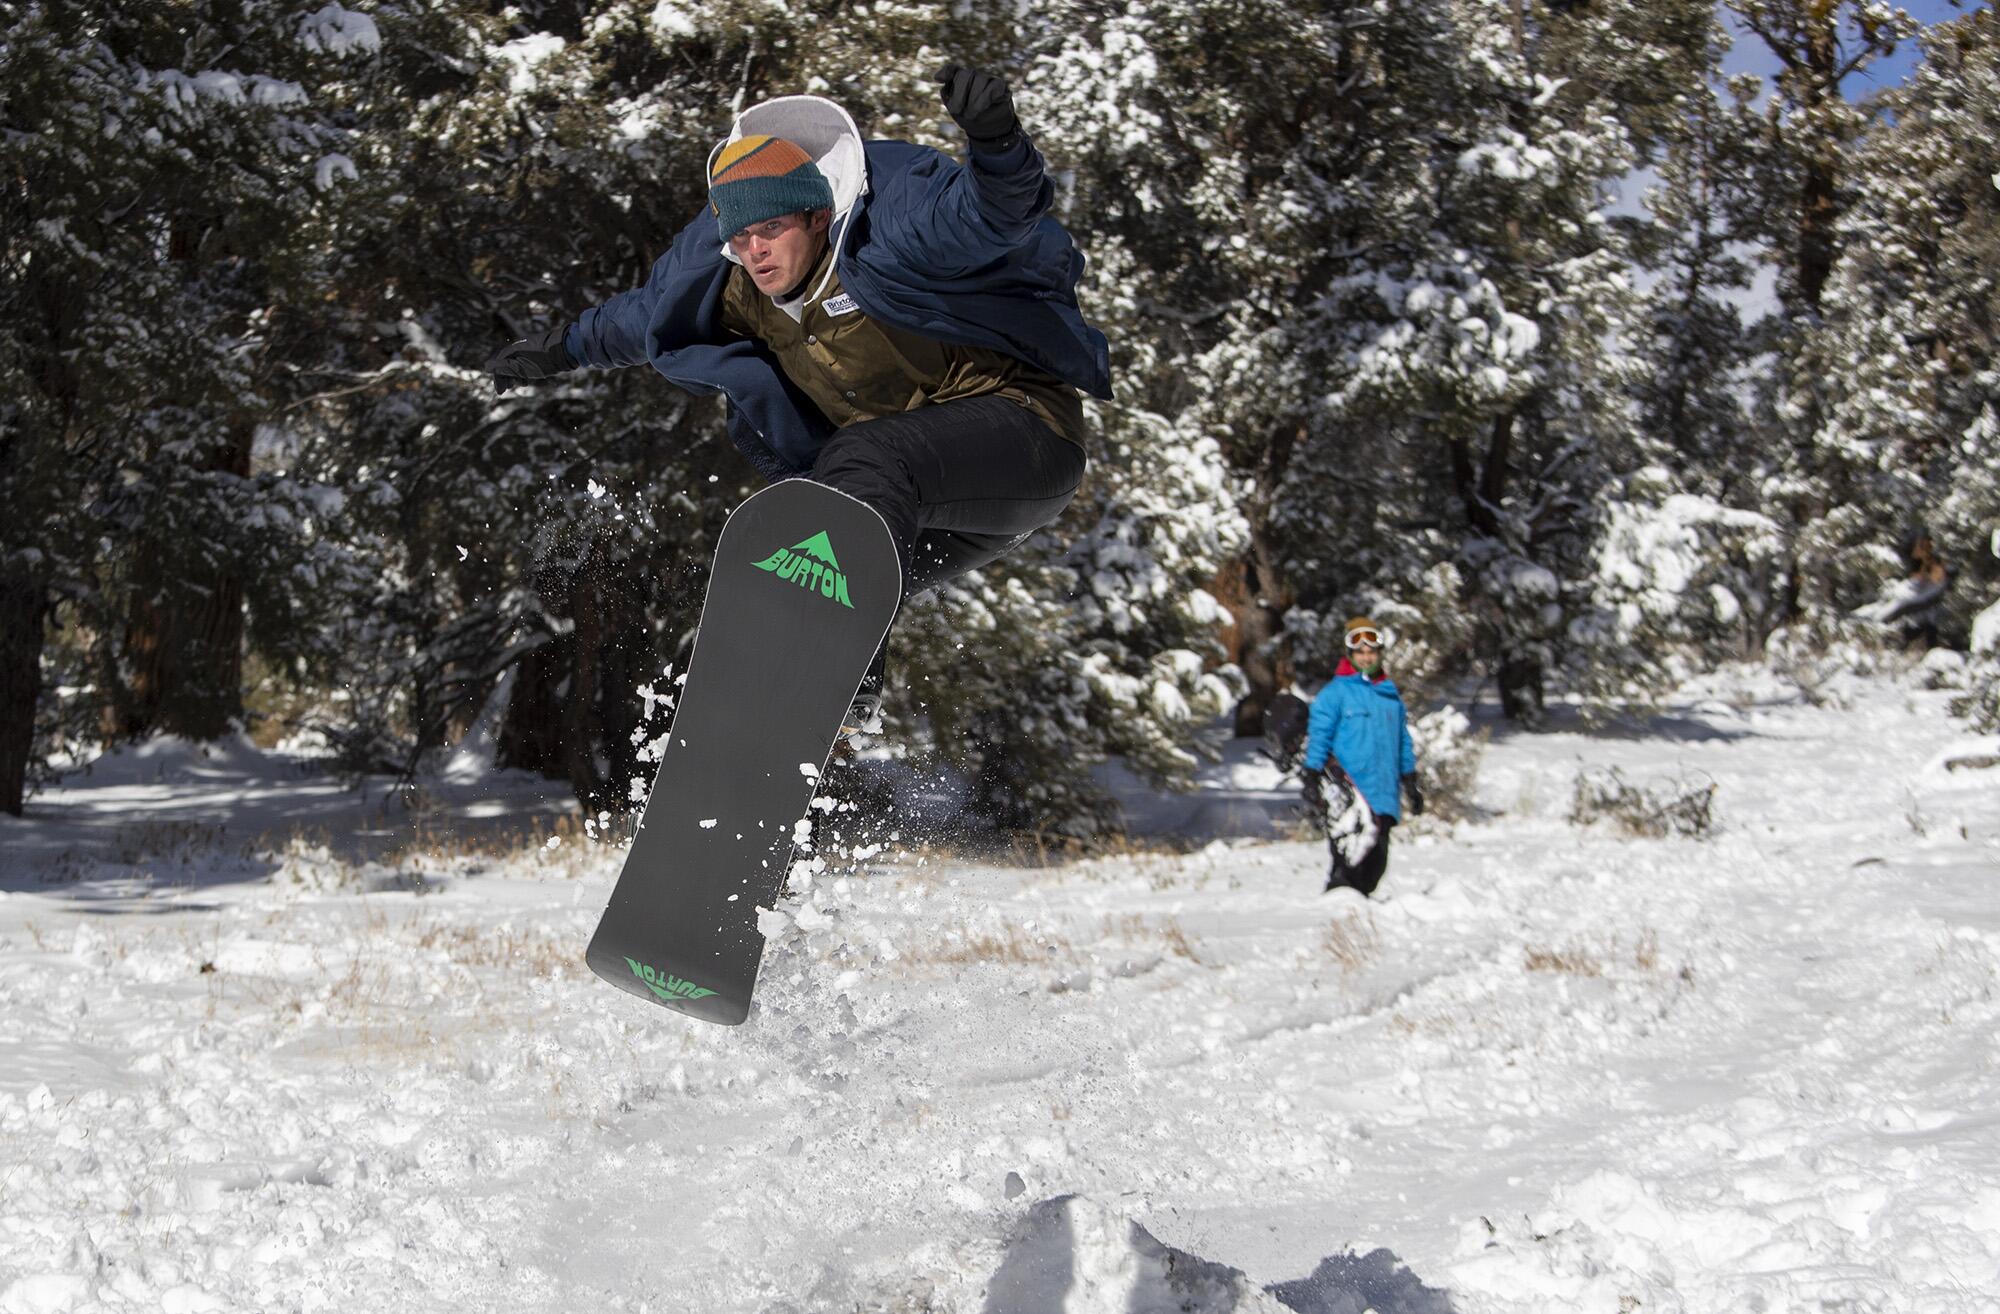 Dorian Ashmore backcountry snowboards with a friend in some fresh snow near Big Bear Lake.